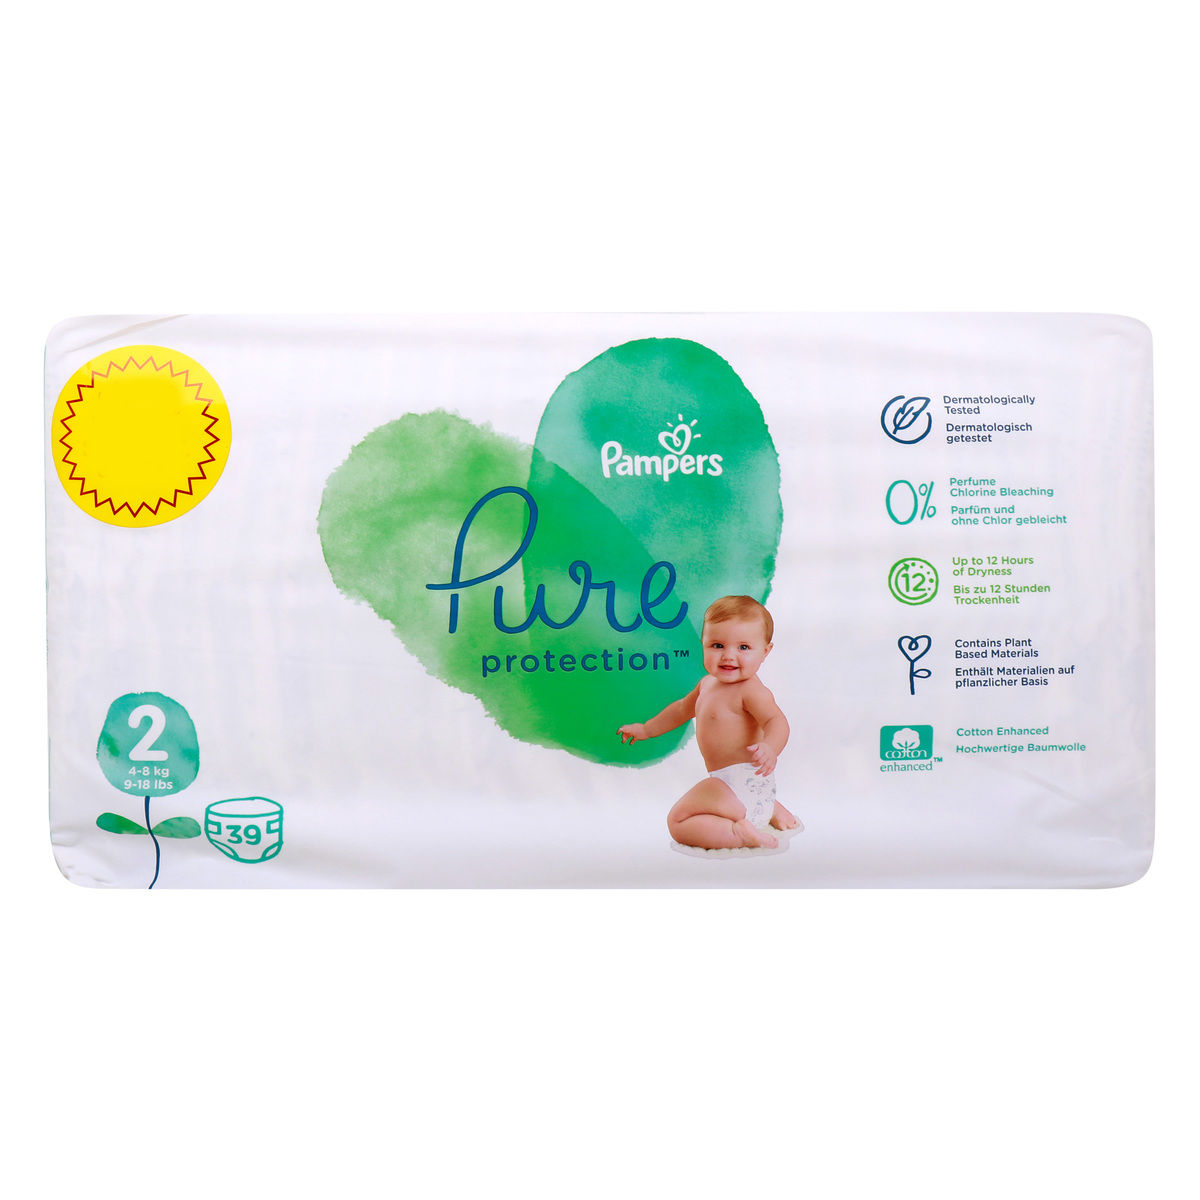 Pampers Pure Protection Baby Diapers Size 2, 4-8kg Value Pack 39 pcs